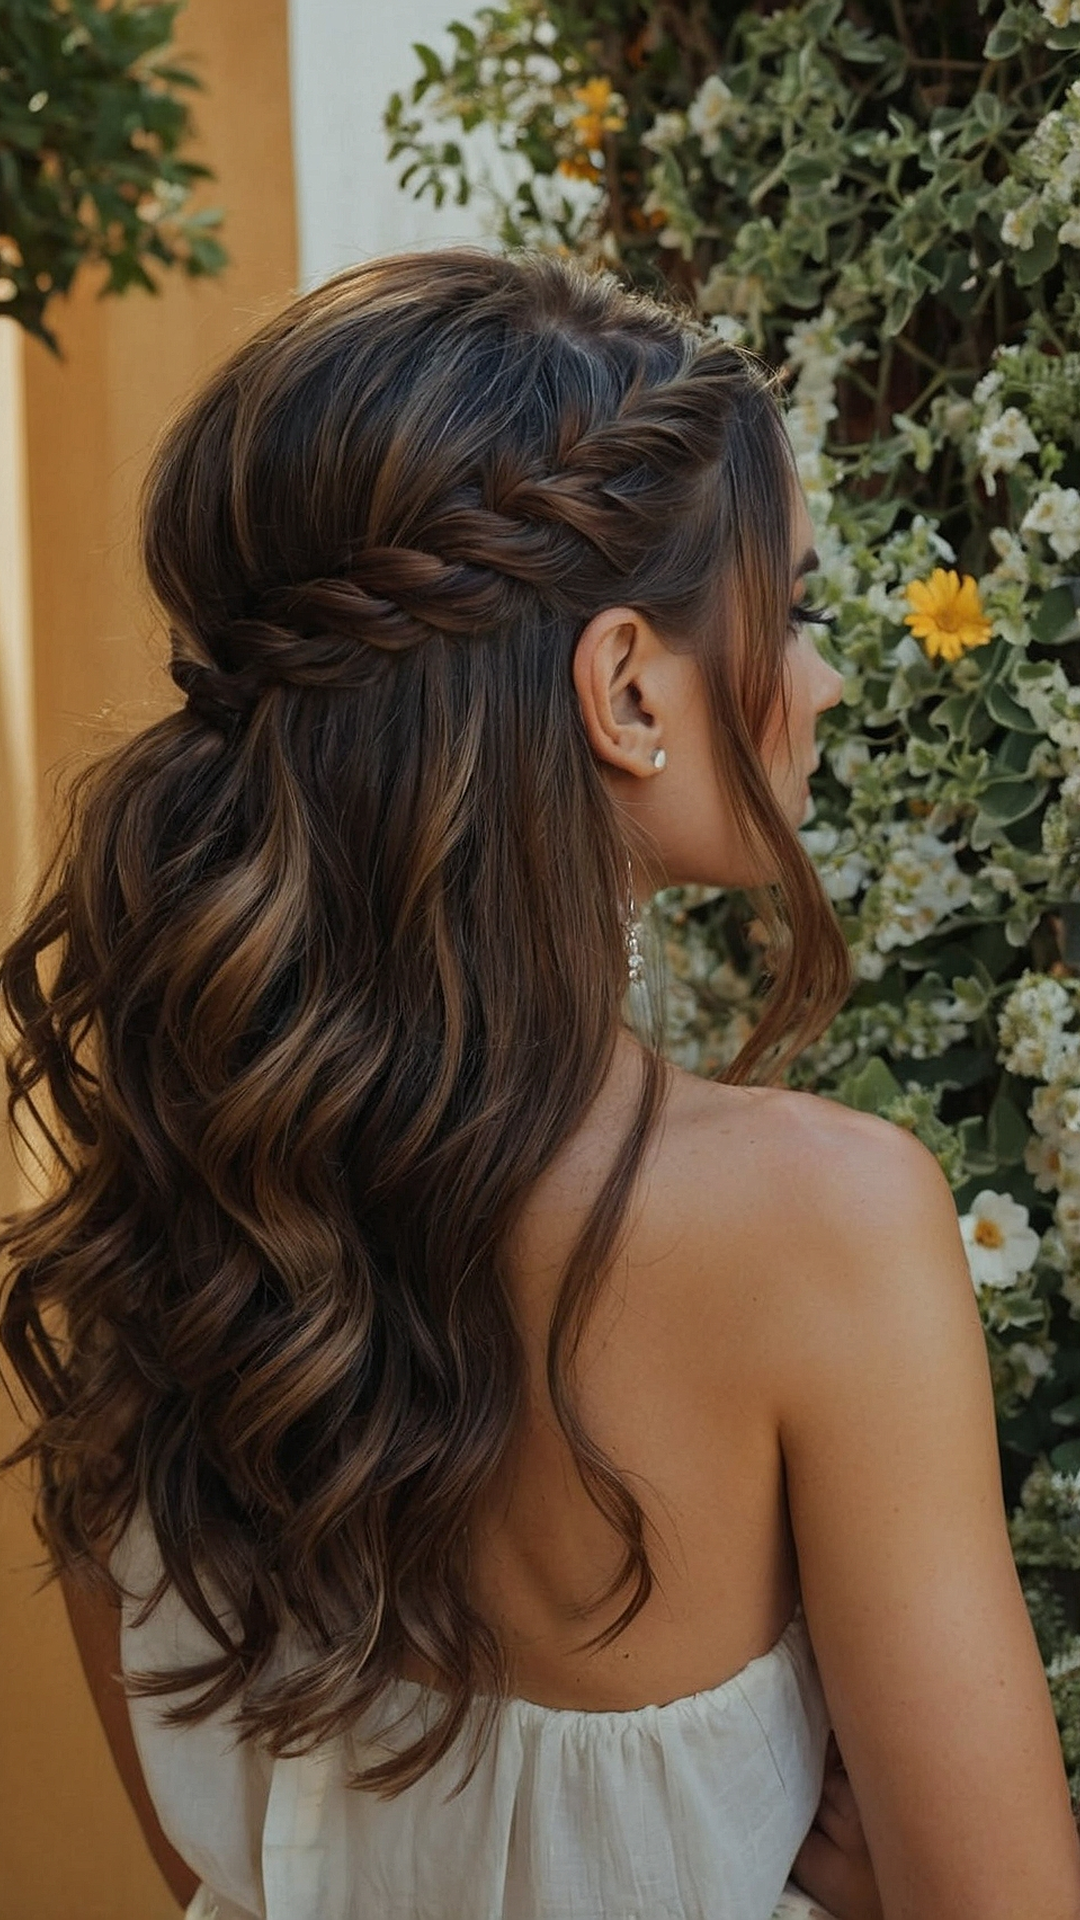 Summer Sizzle: Hair Inspiration for the Season